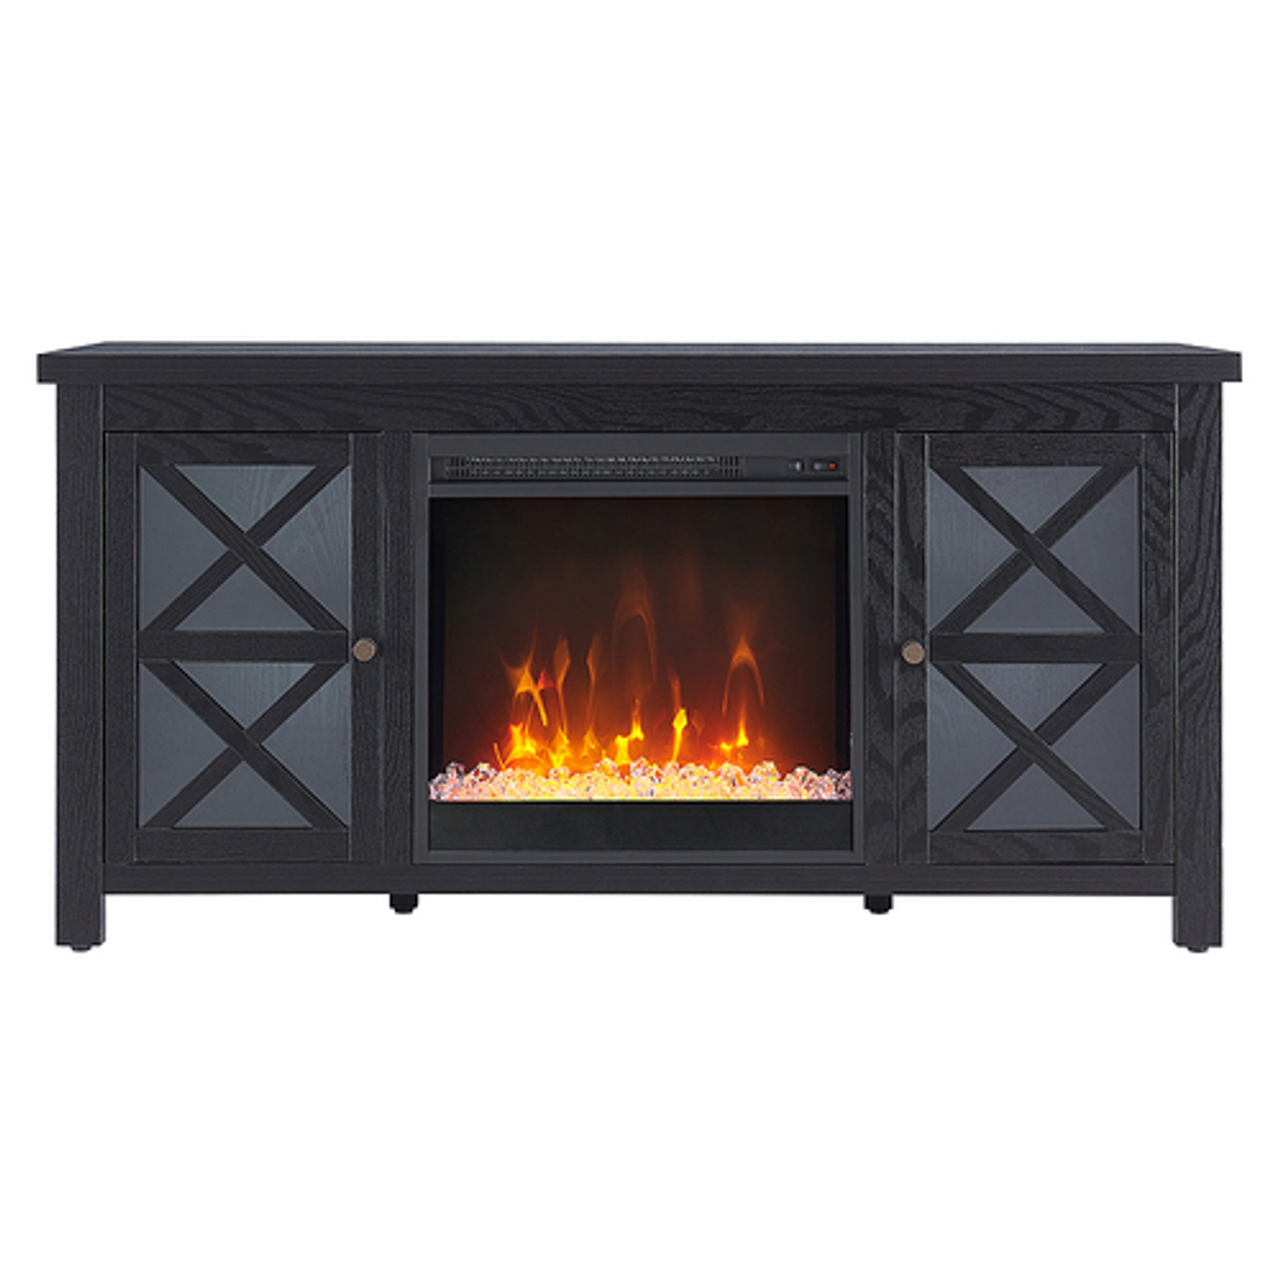 Camden&Wells - Colton 47.75" TV Stand with Crystal Fireplace - Blackened Bronze